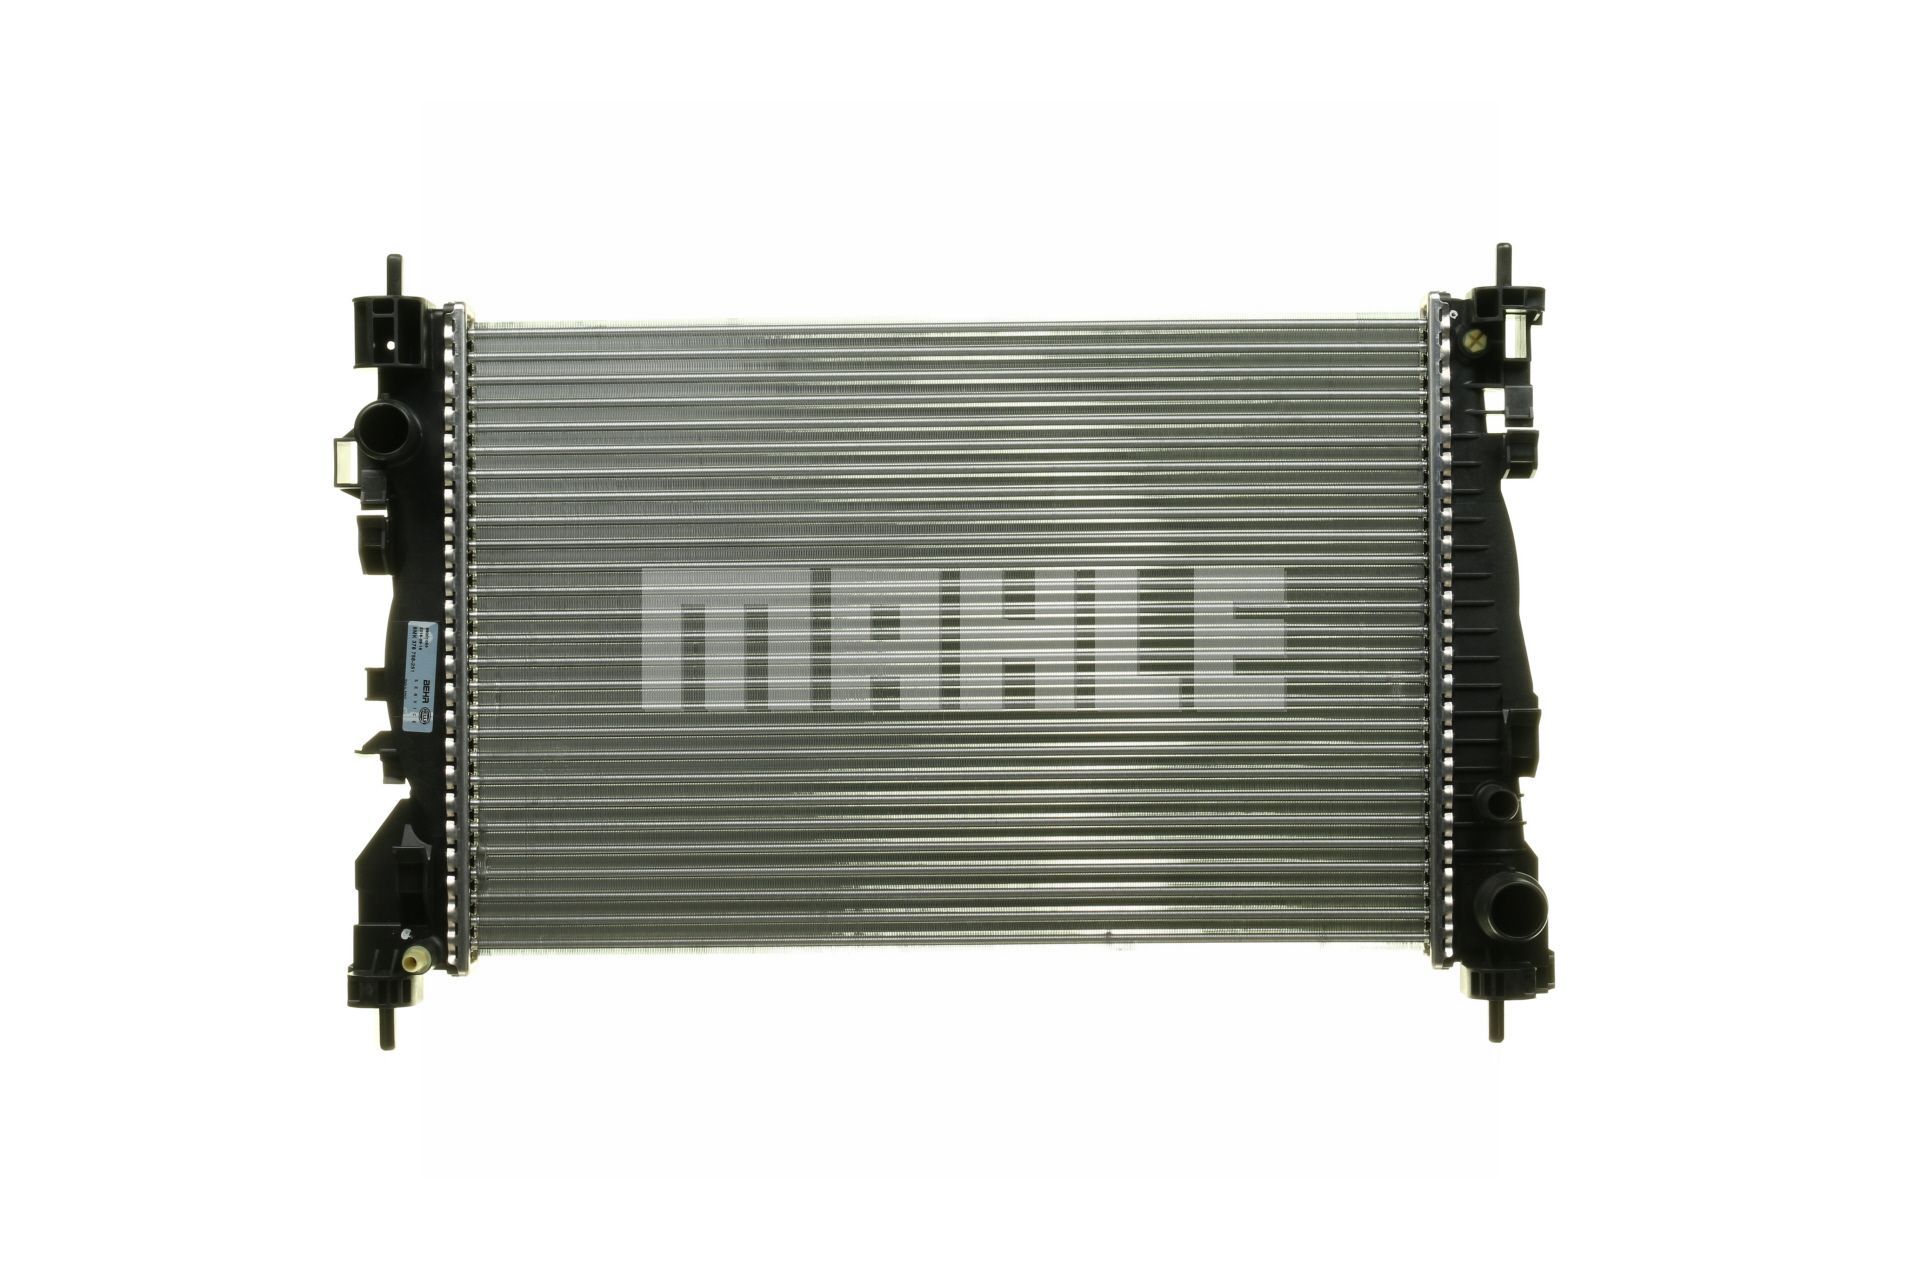 376756251 MAHLE ORIGINAL 610 x 405 x 26 mm, Mechanically jointed cooling fins Radiator CR 1179 000P buy